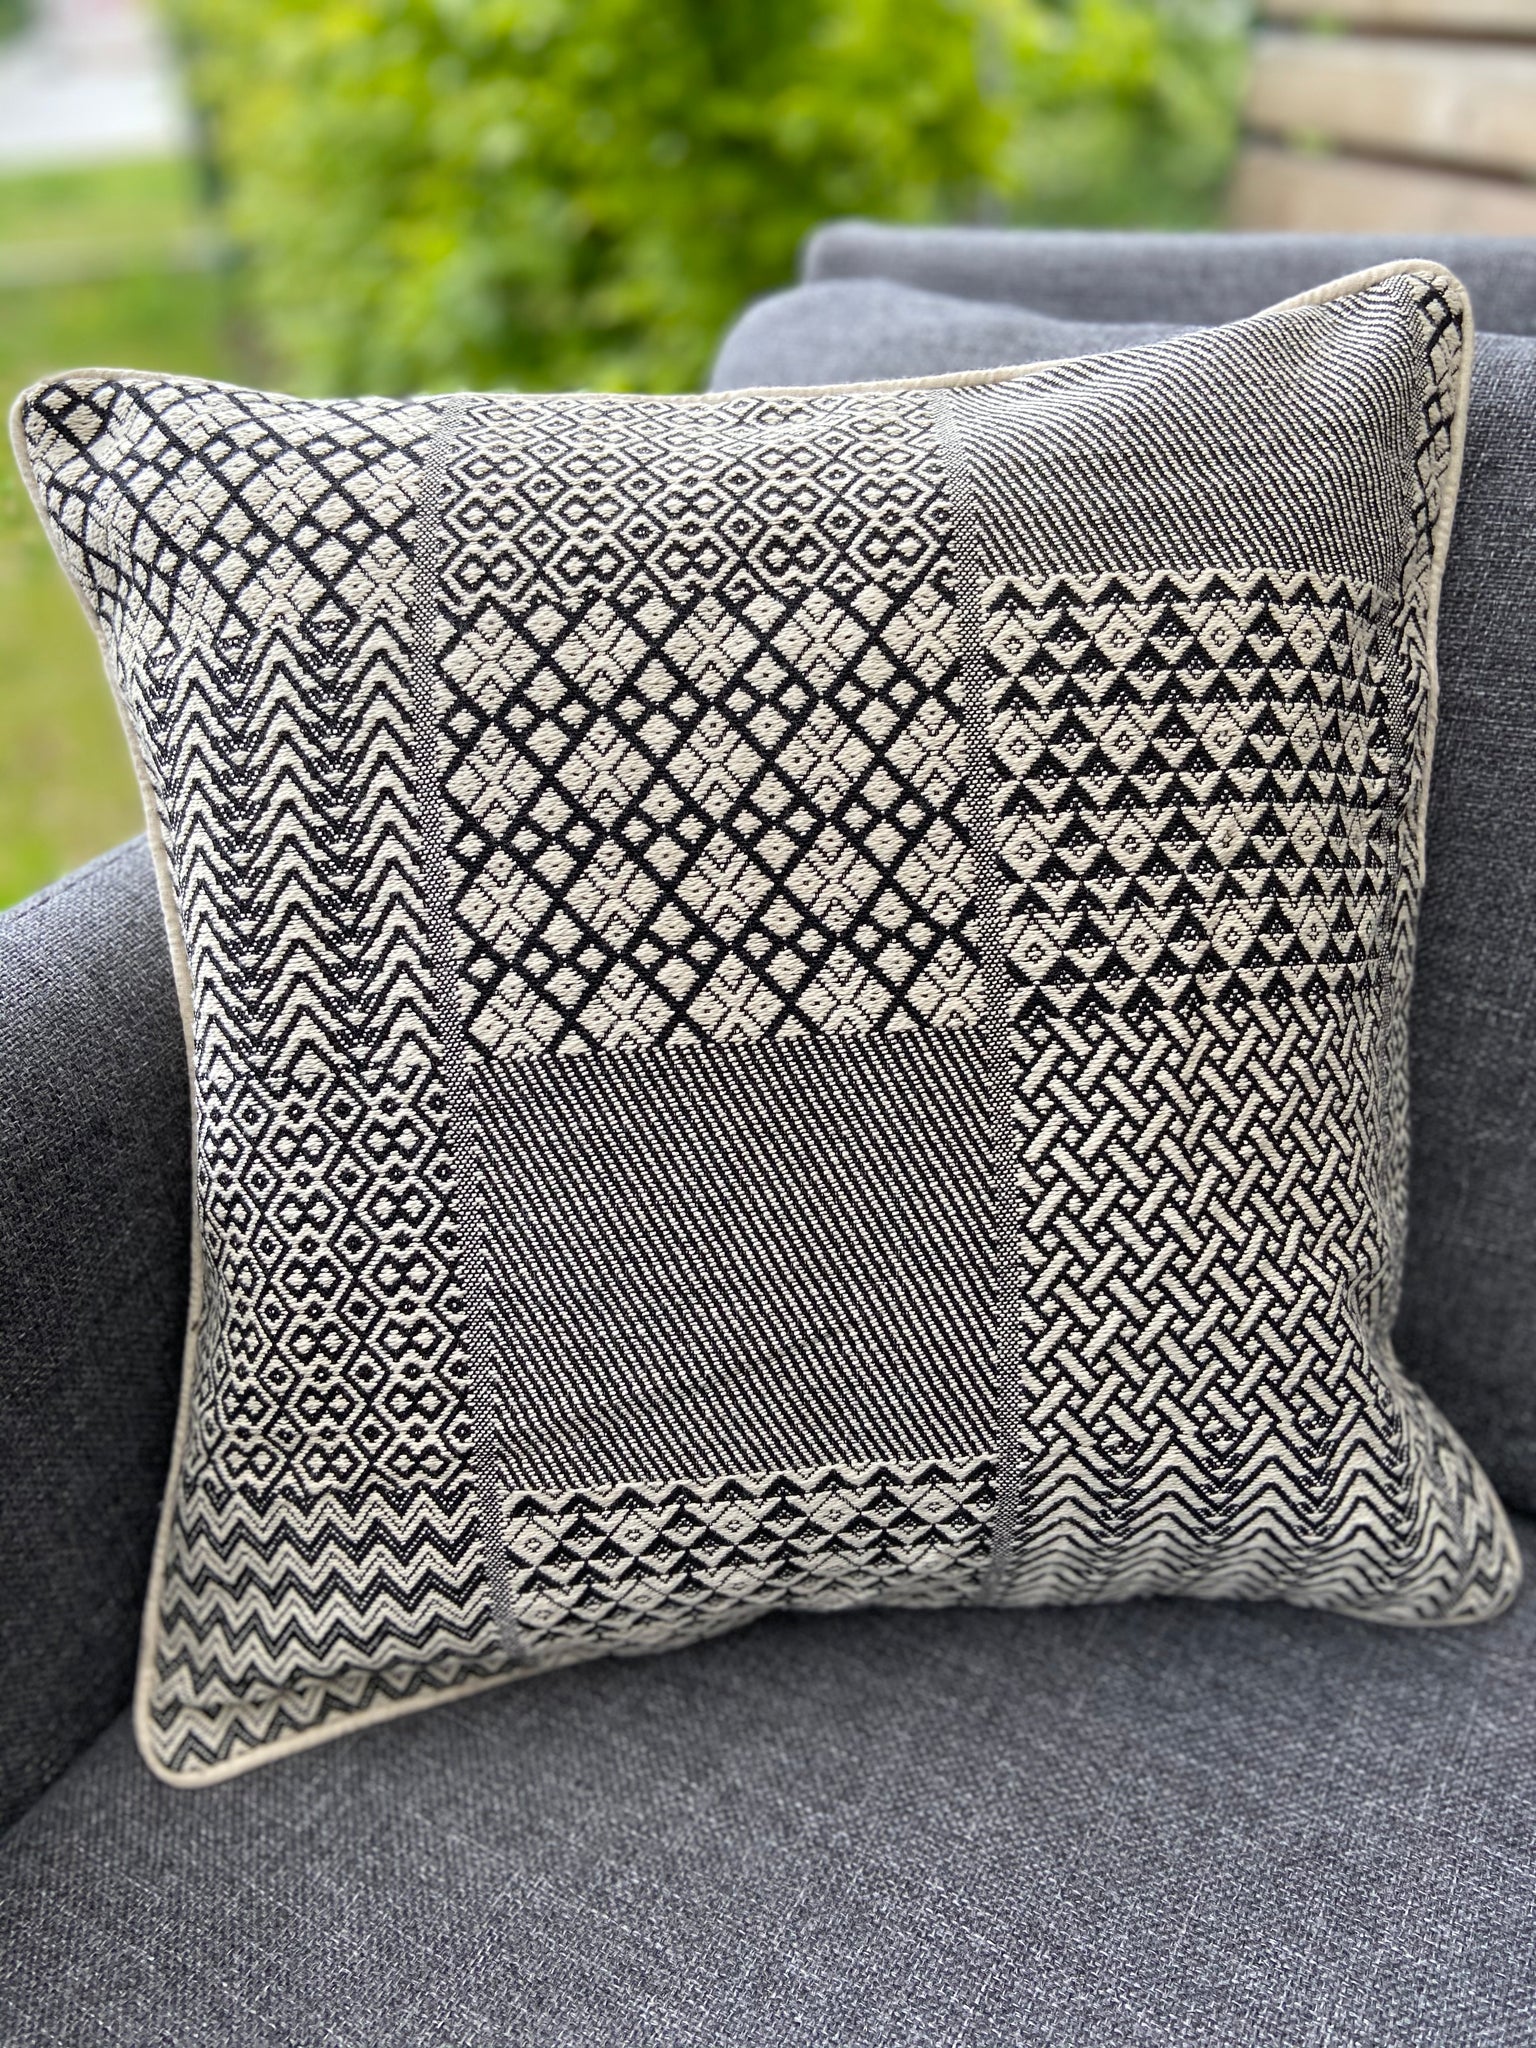 Cushion Cover-block design pattern1 in black and white